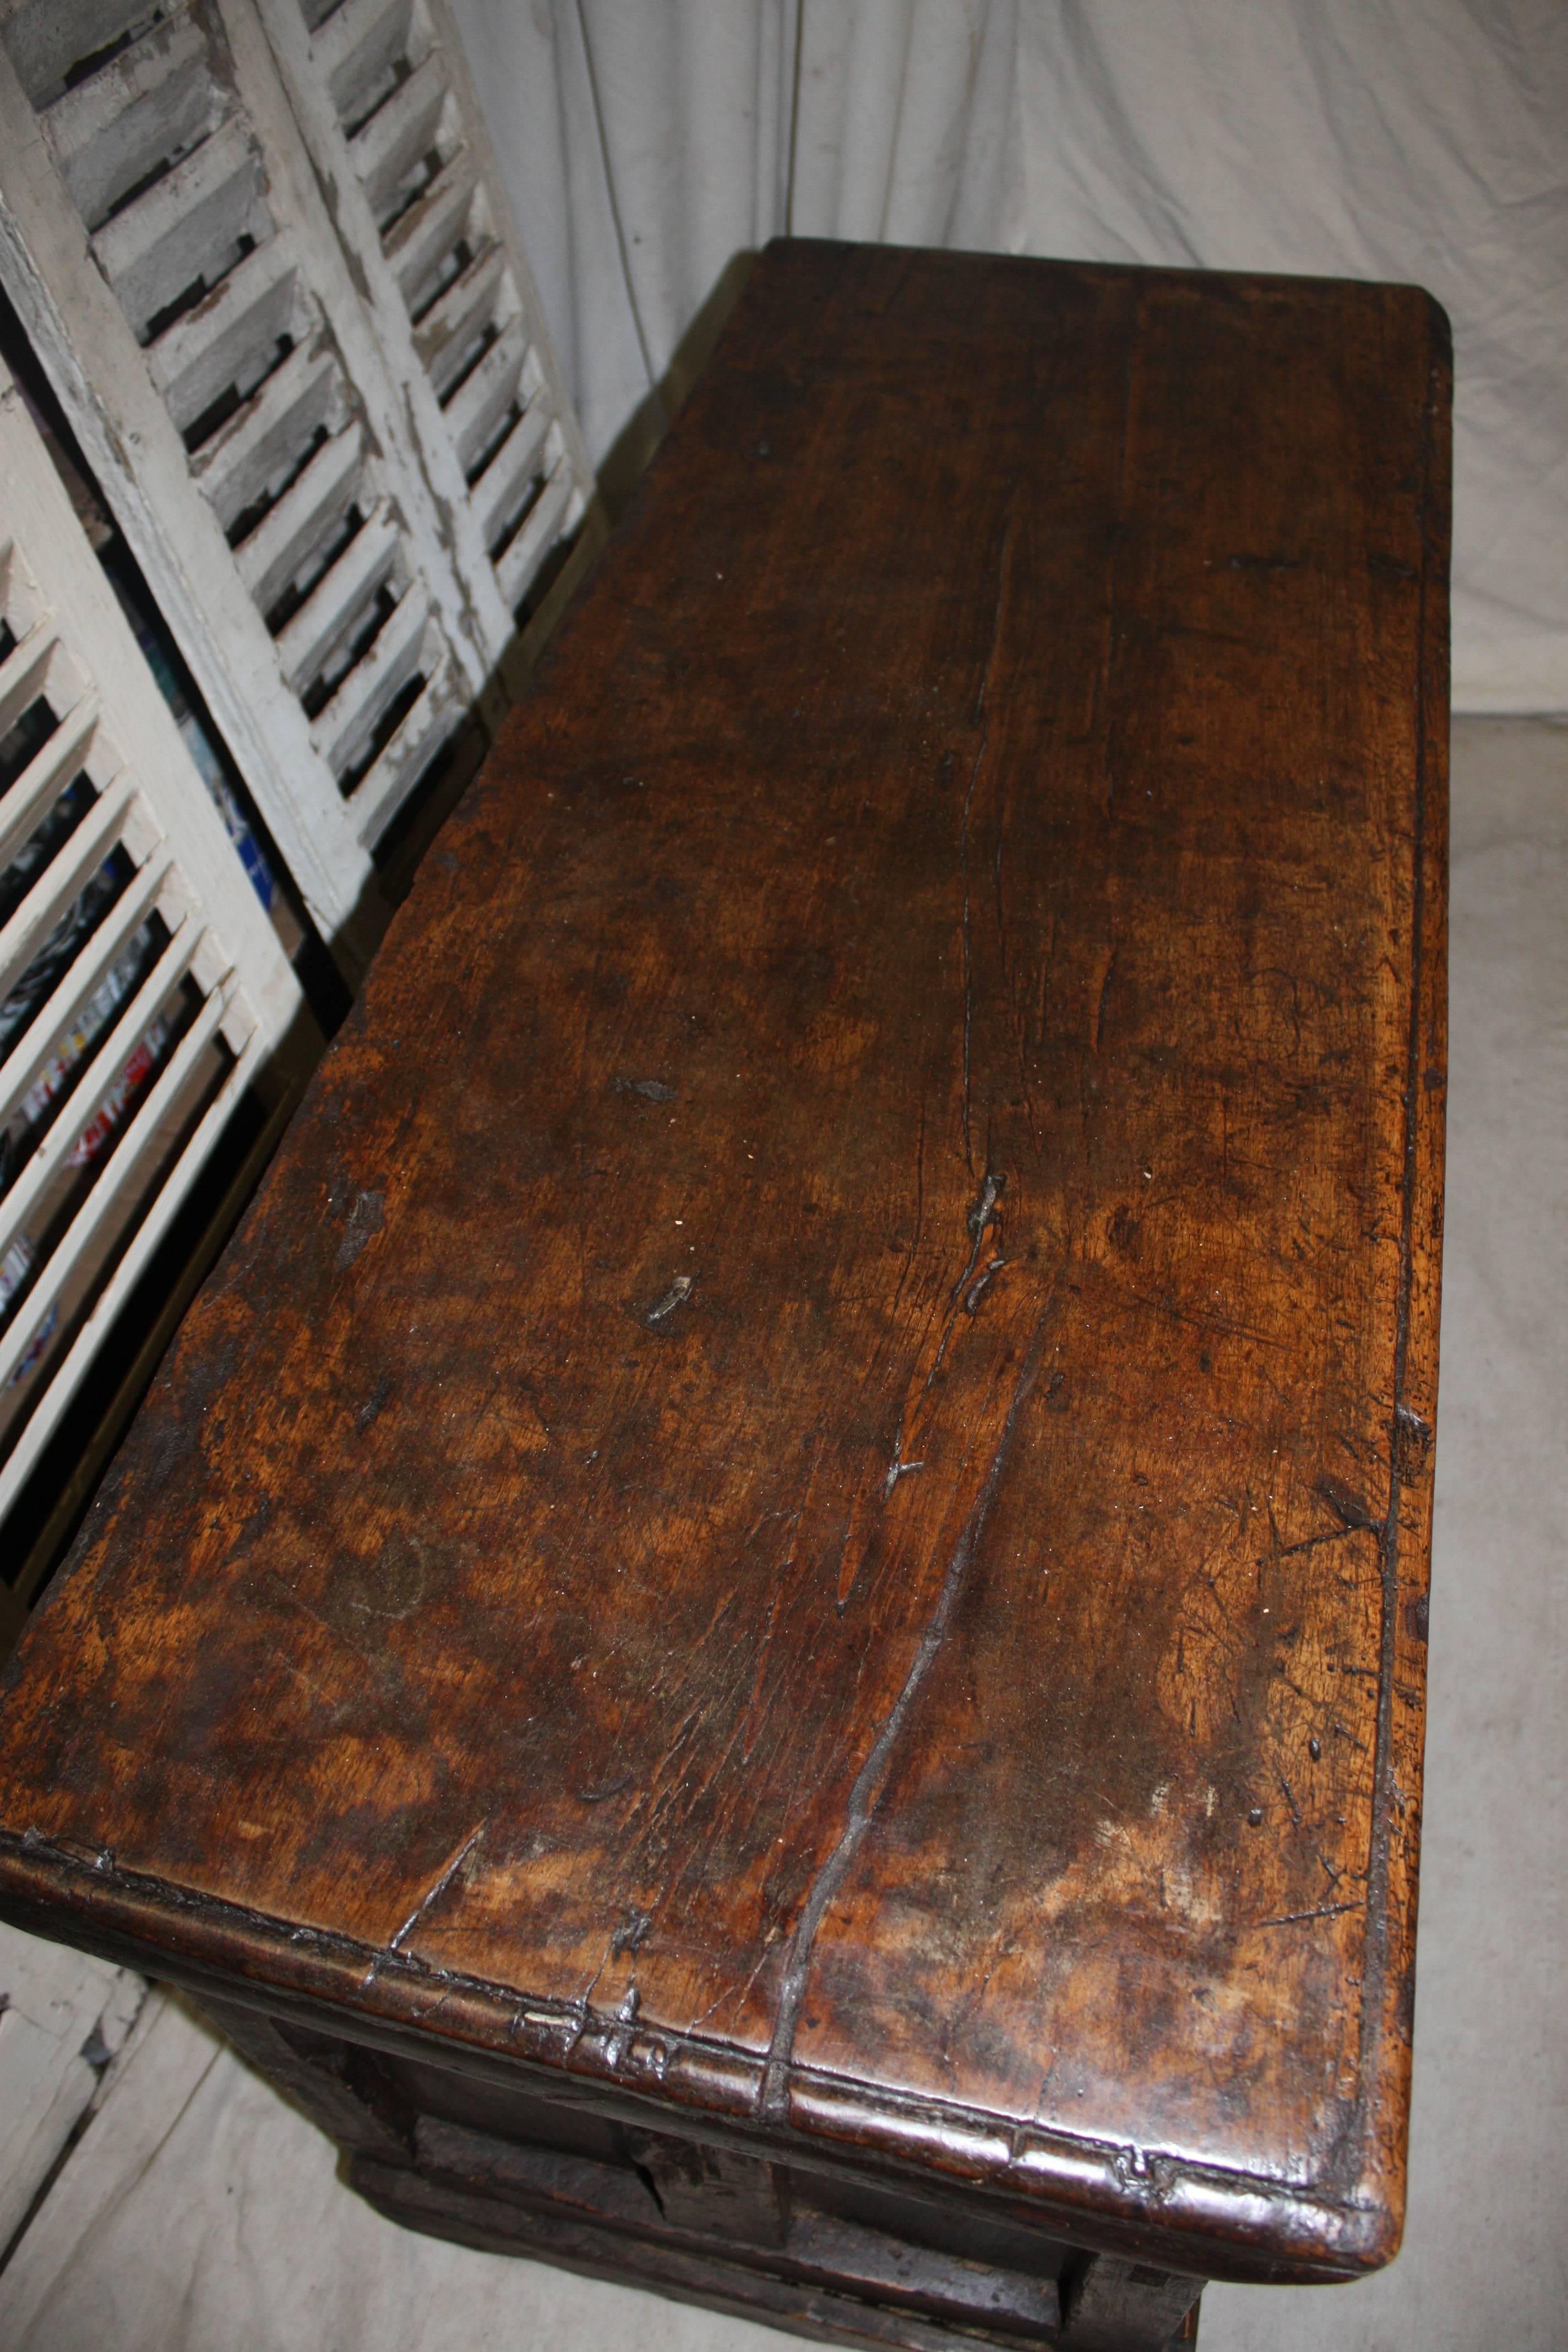 Late rustic 17th century French oak trunk.